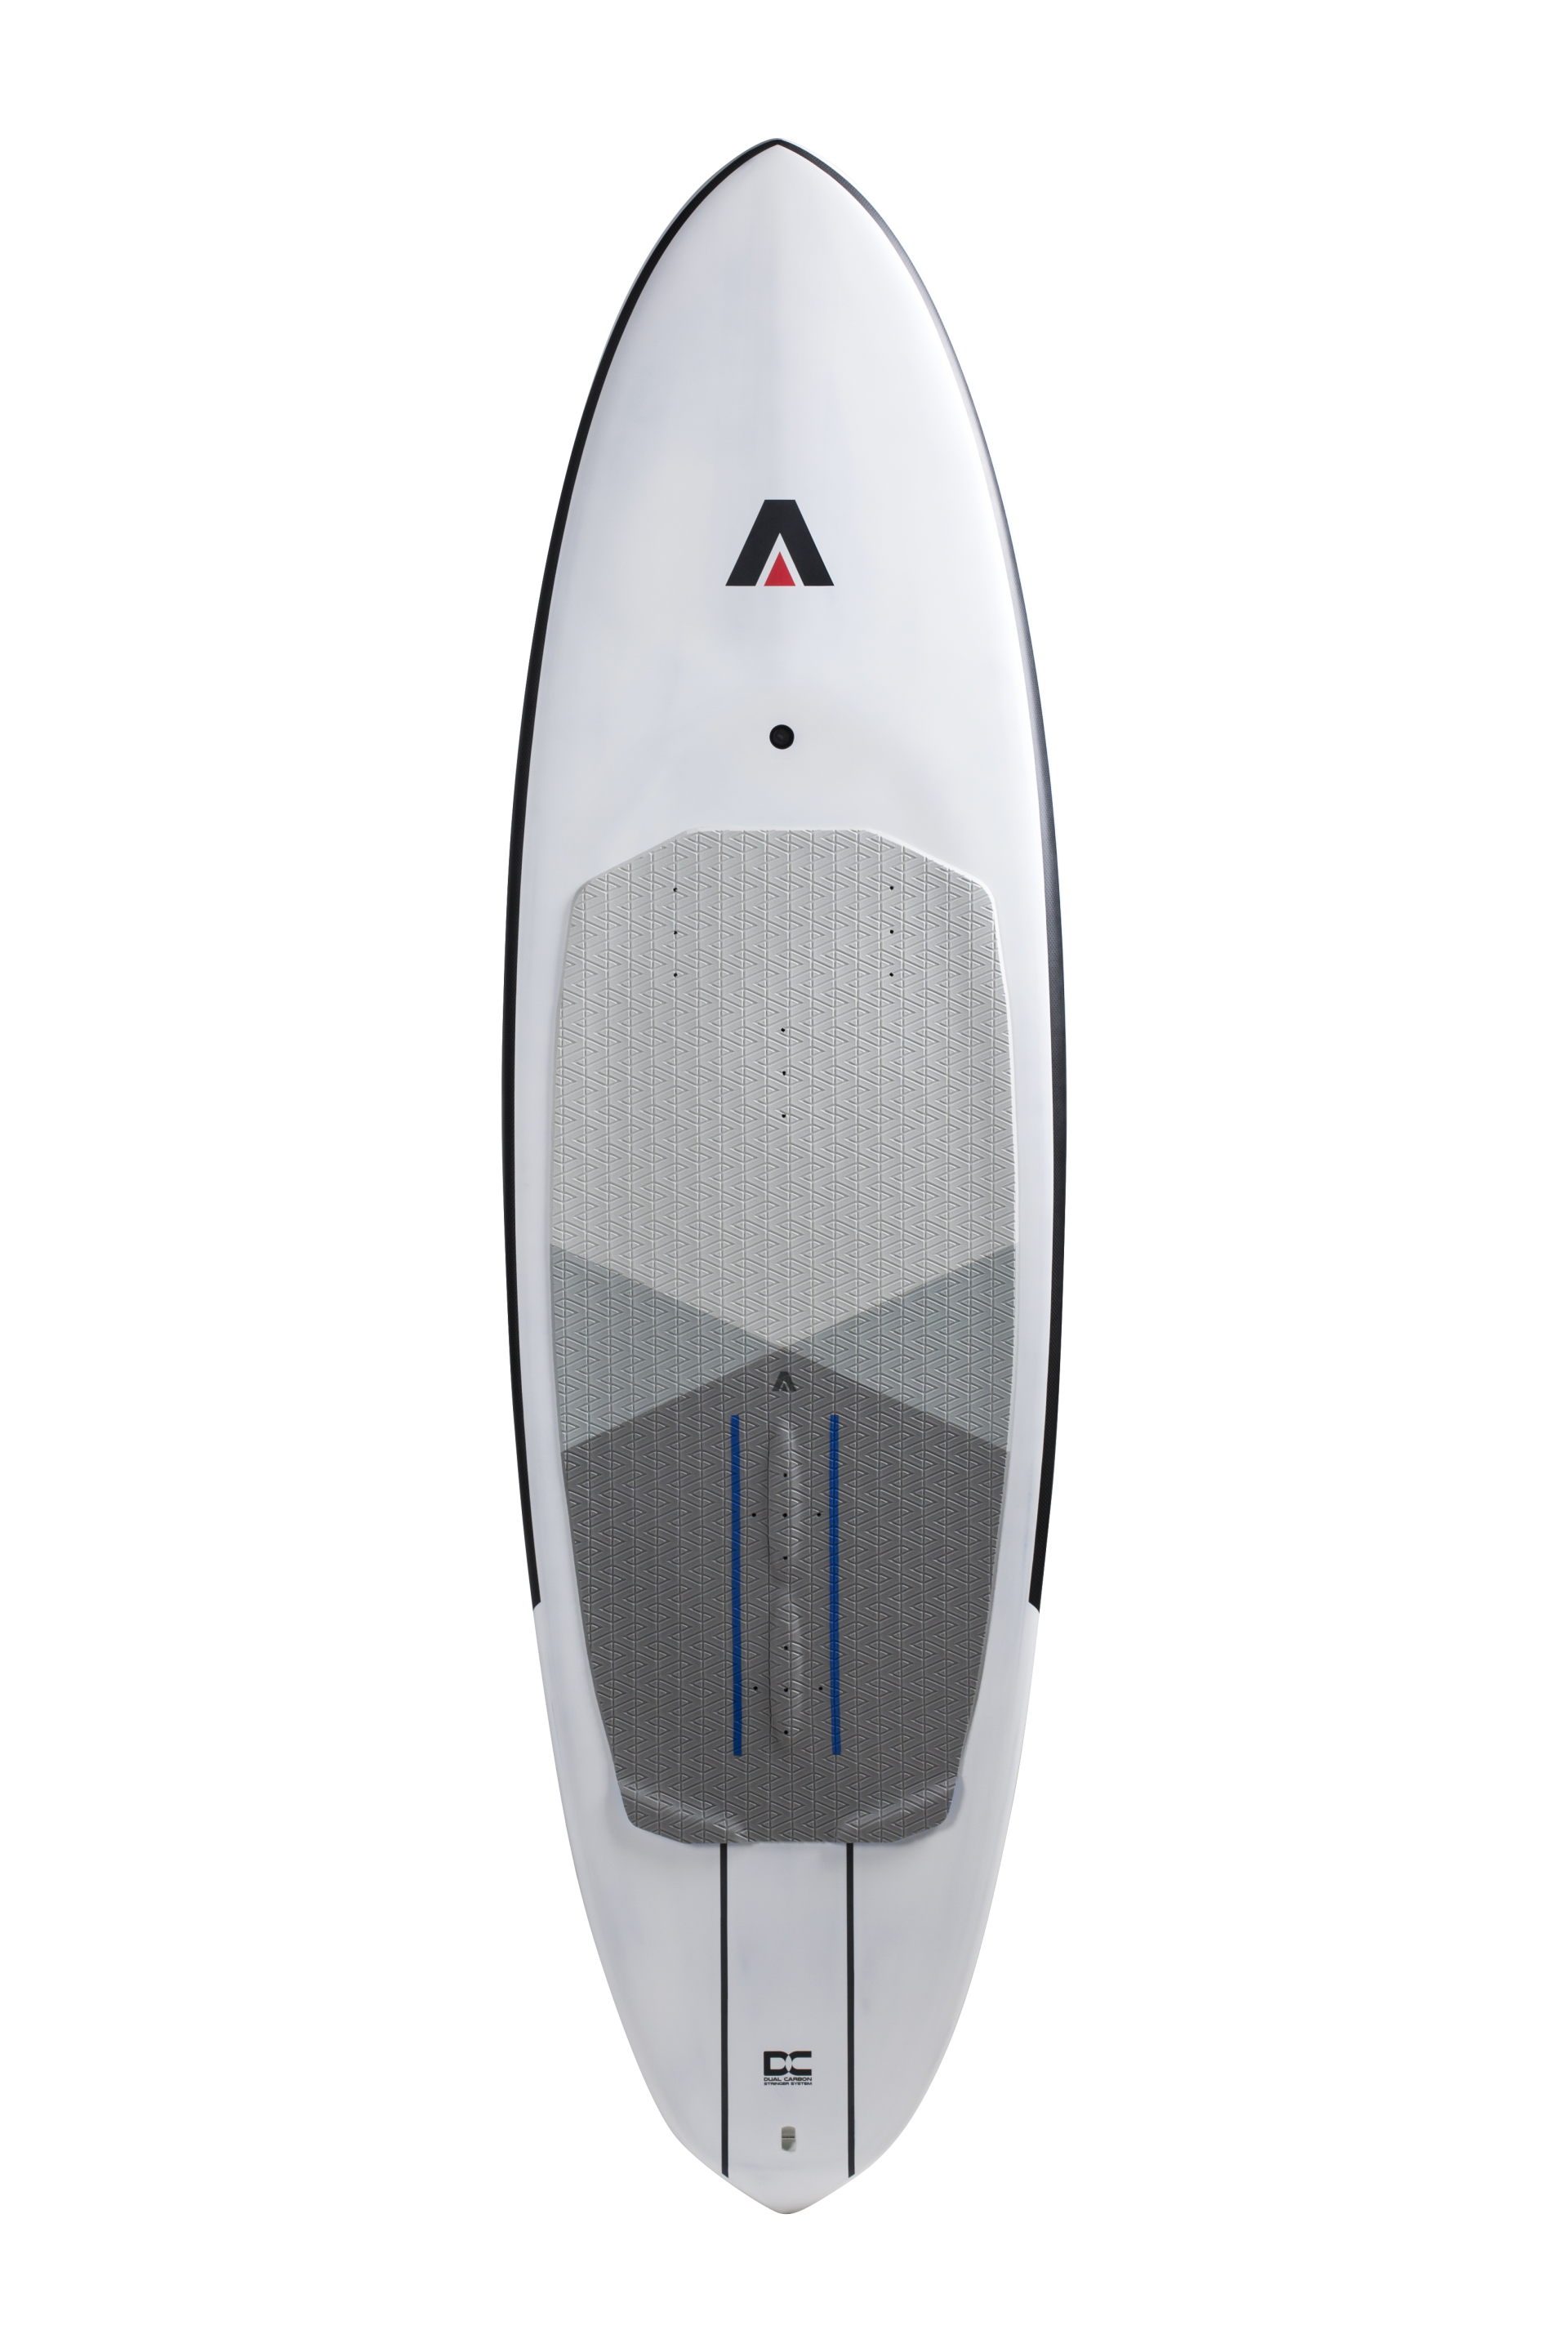 Armstrong Midlength Foilboard 100 Liter